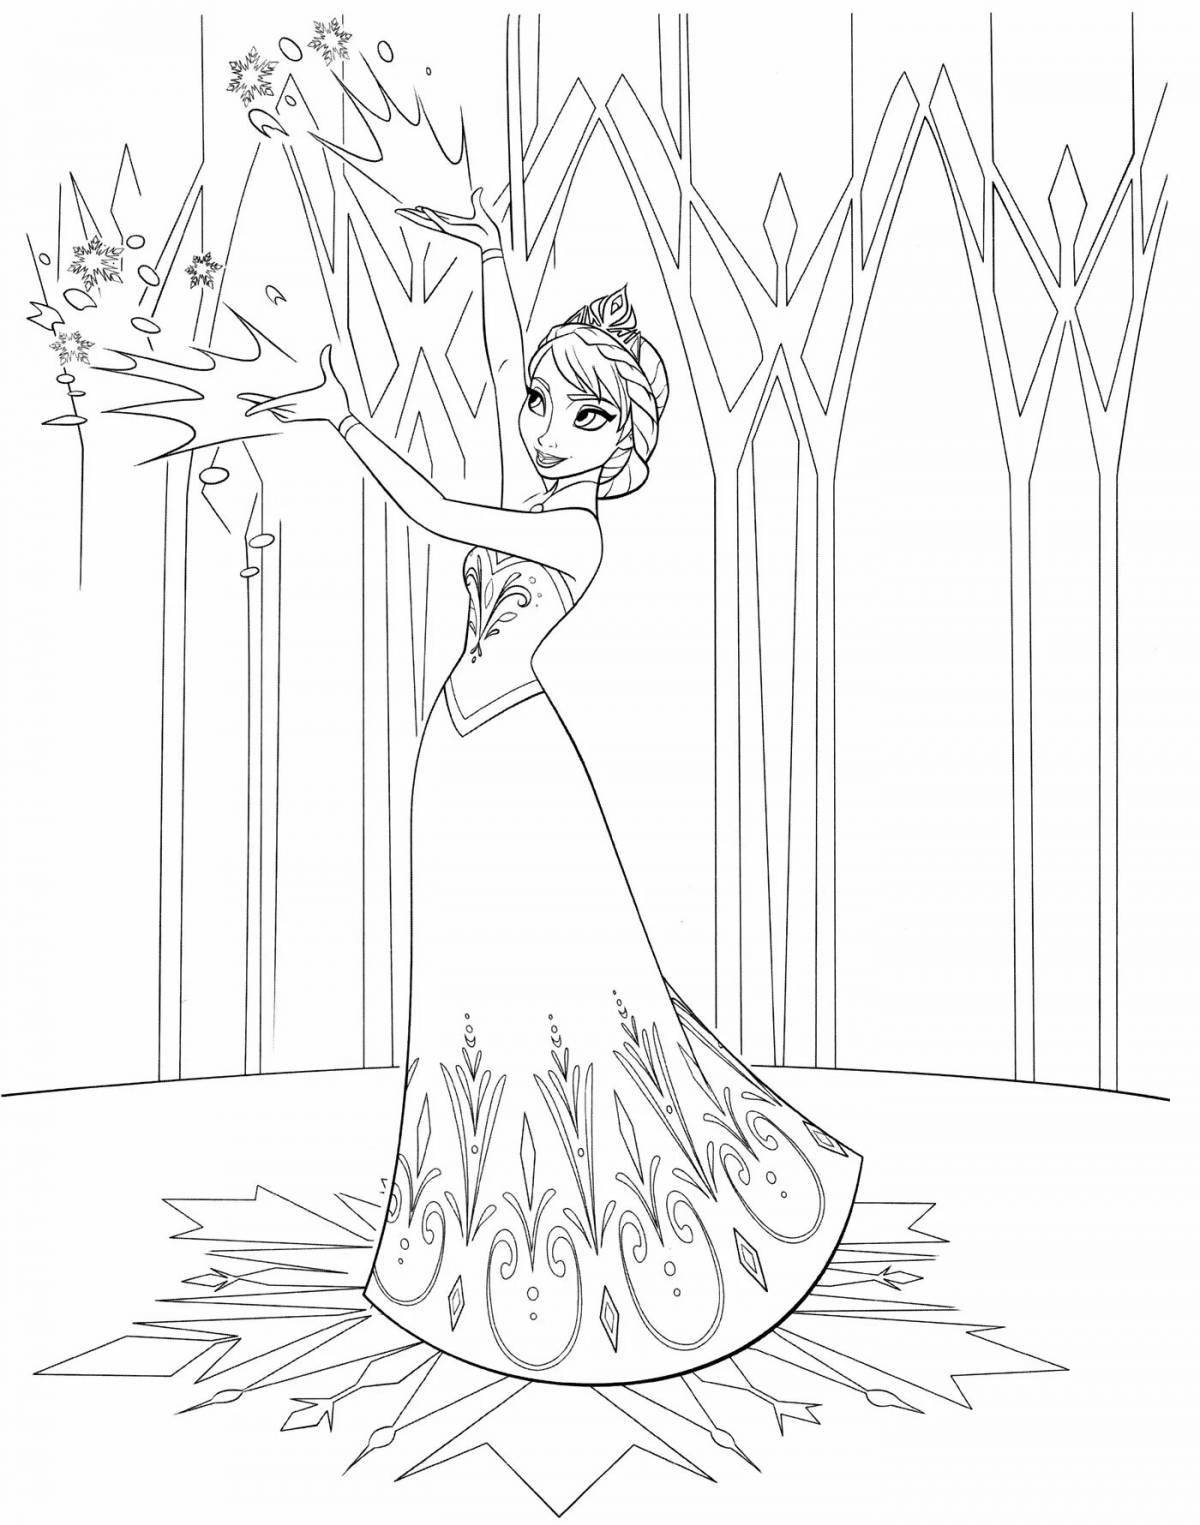 Violent cold heart coloring pages for children 6-7 years old